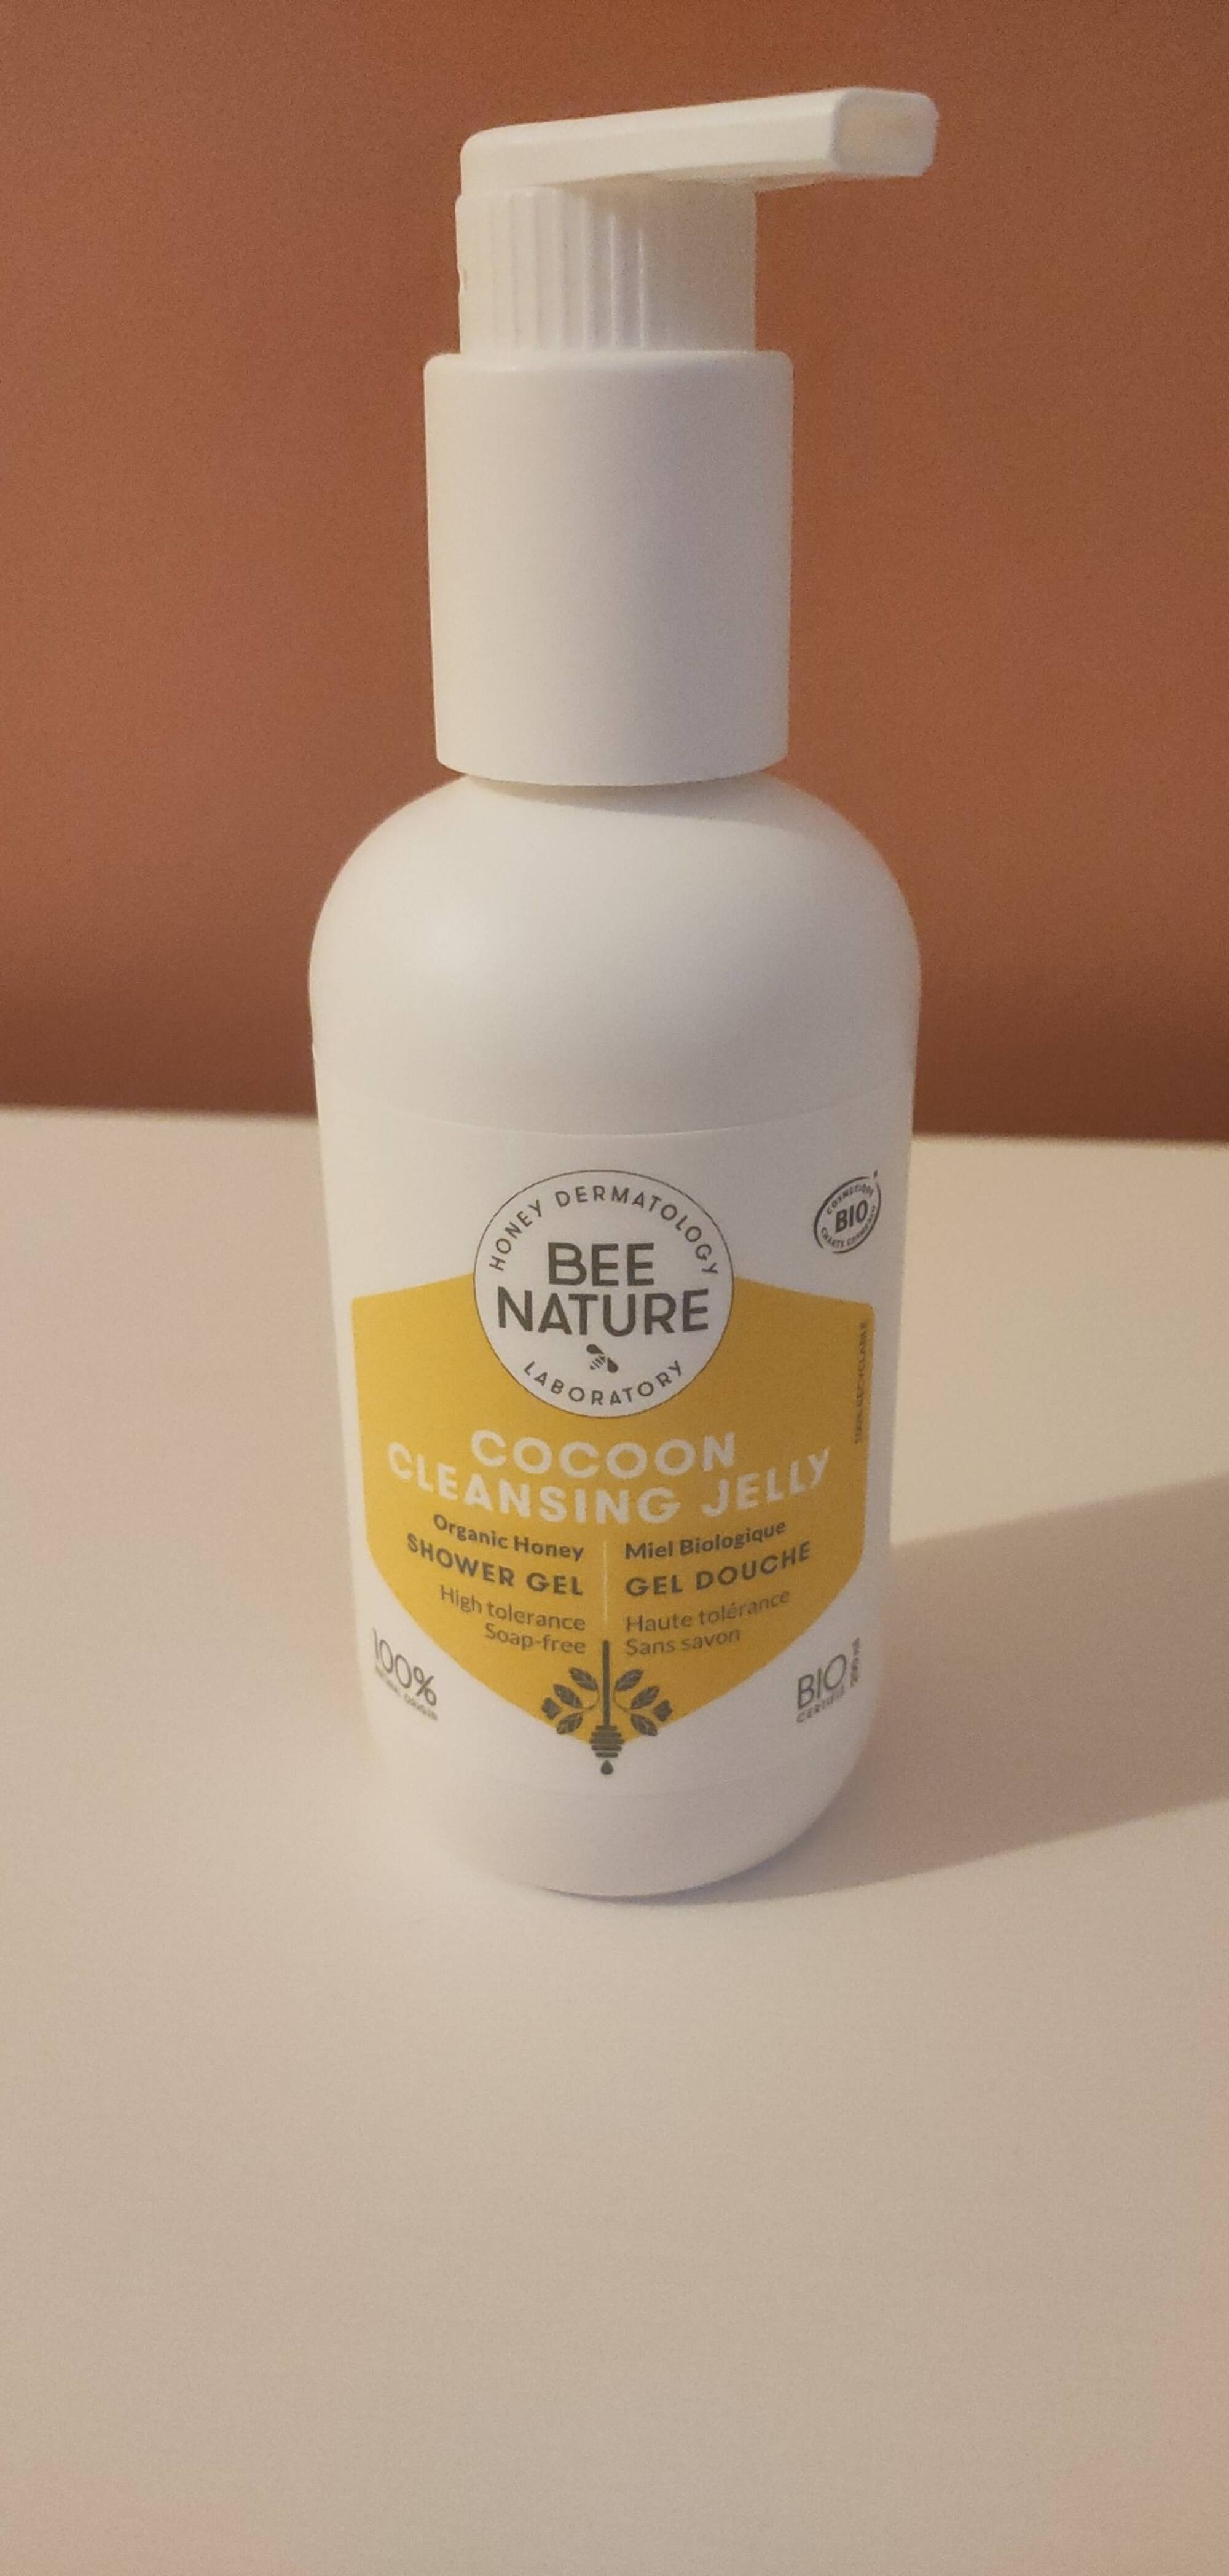 BEE NATURE - Cocoon cleansing jelly - Gel douche